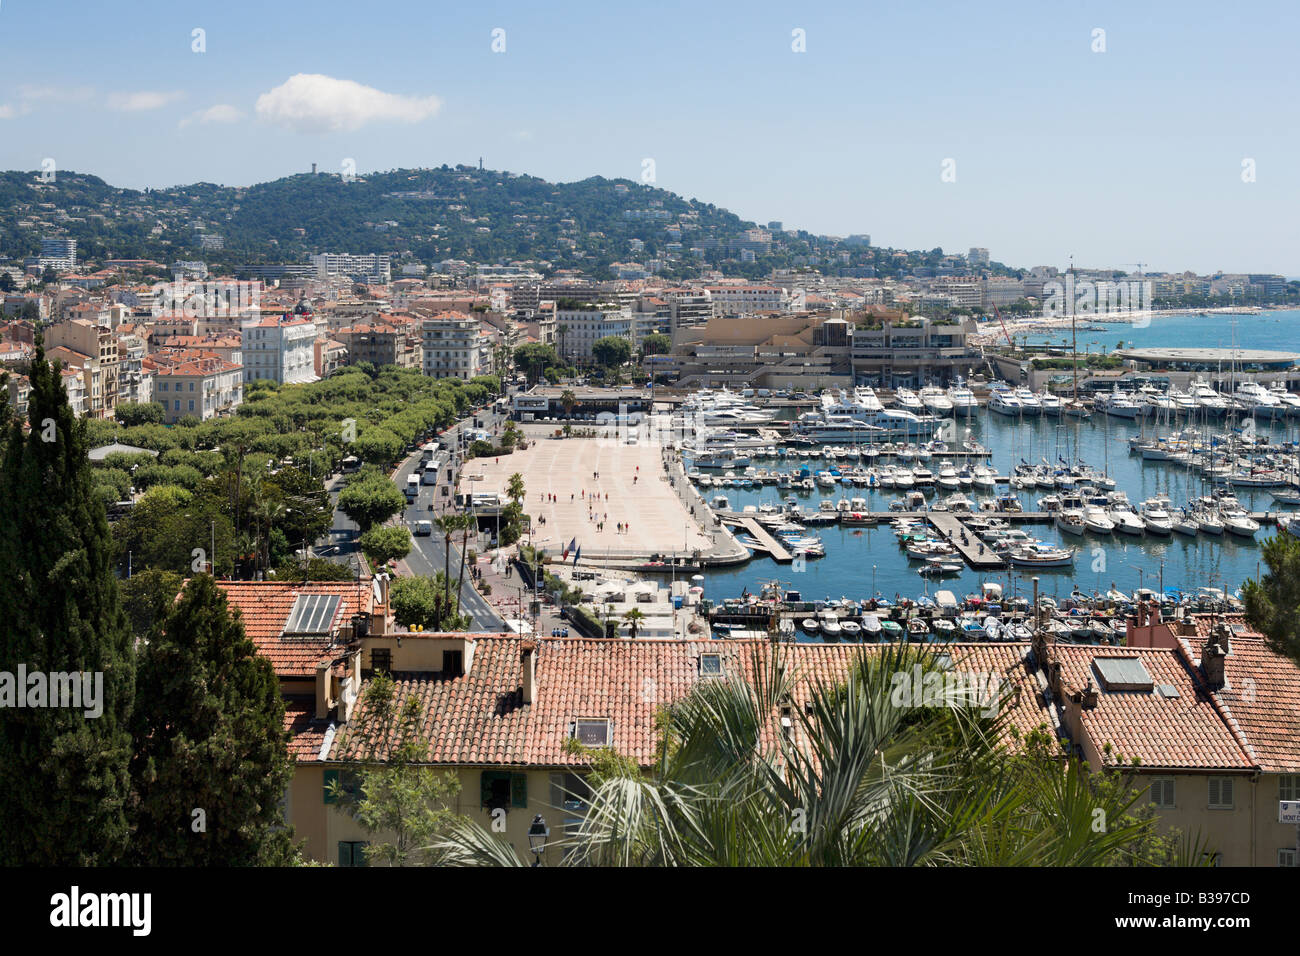 View over the harbour and town from Musee du Castre on Le Suquet Hill, Cannes, Cote d'Azur, Provence, France Stock Photo